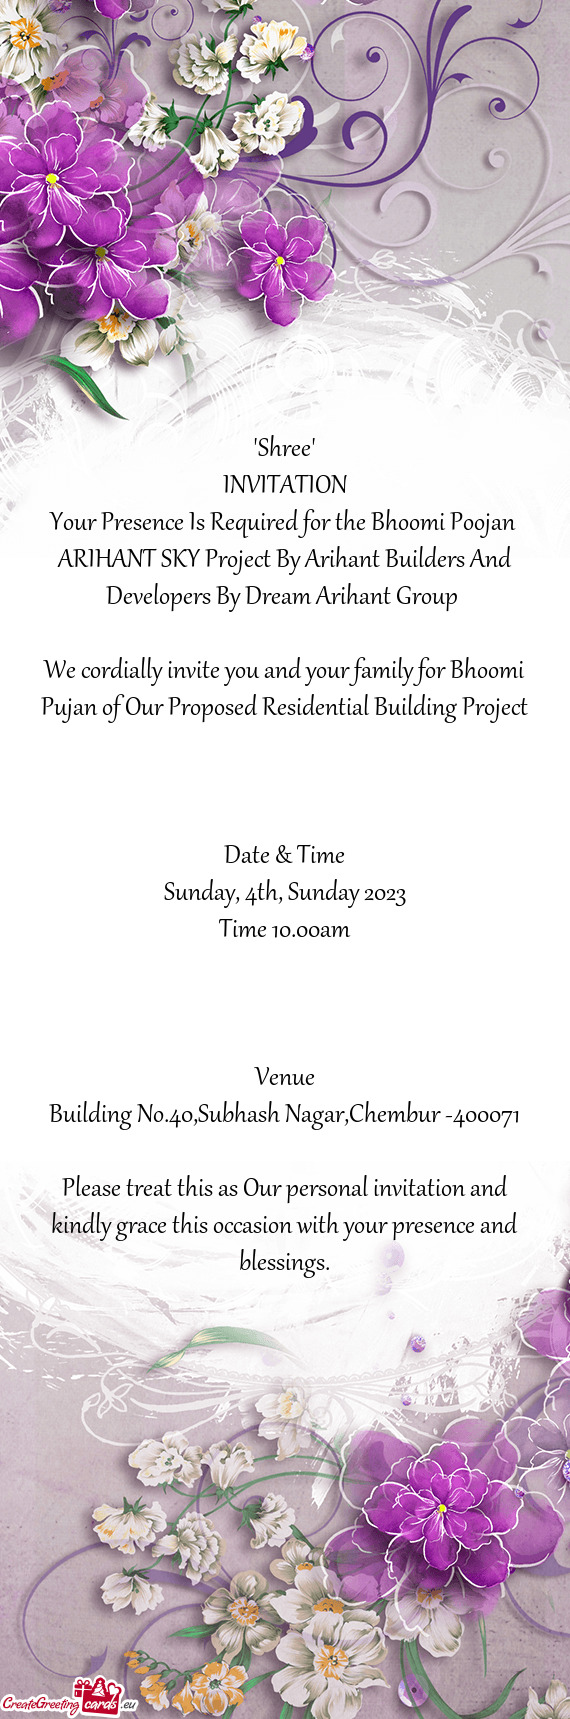 ARIHANT SKY Project By Arihant Builders And Developers By Dream Arihant Group